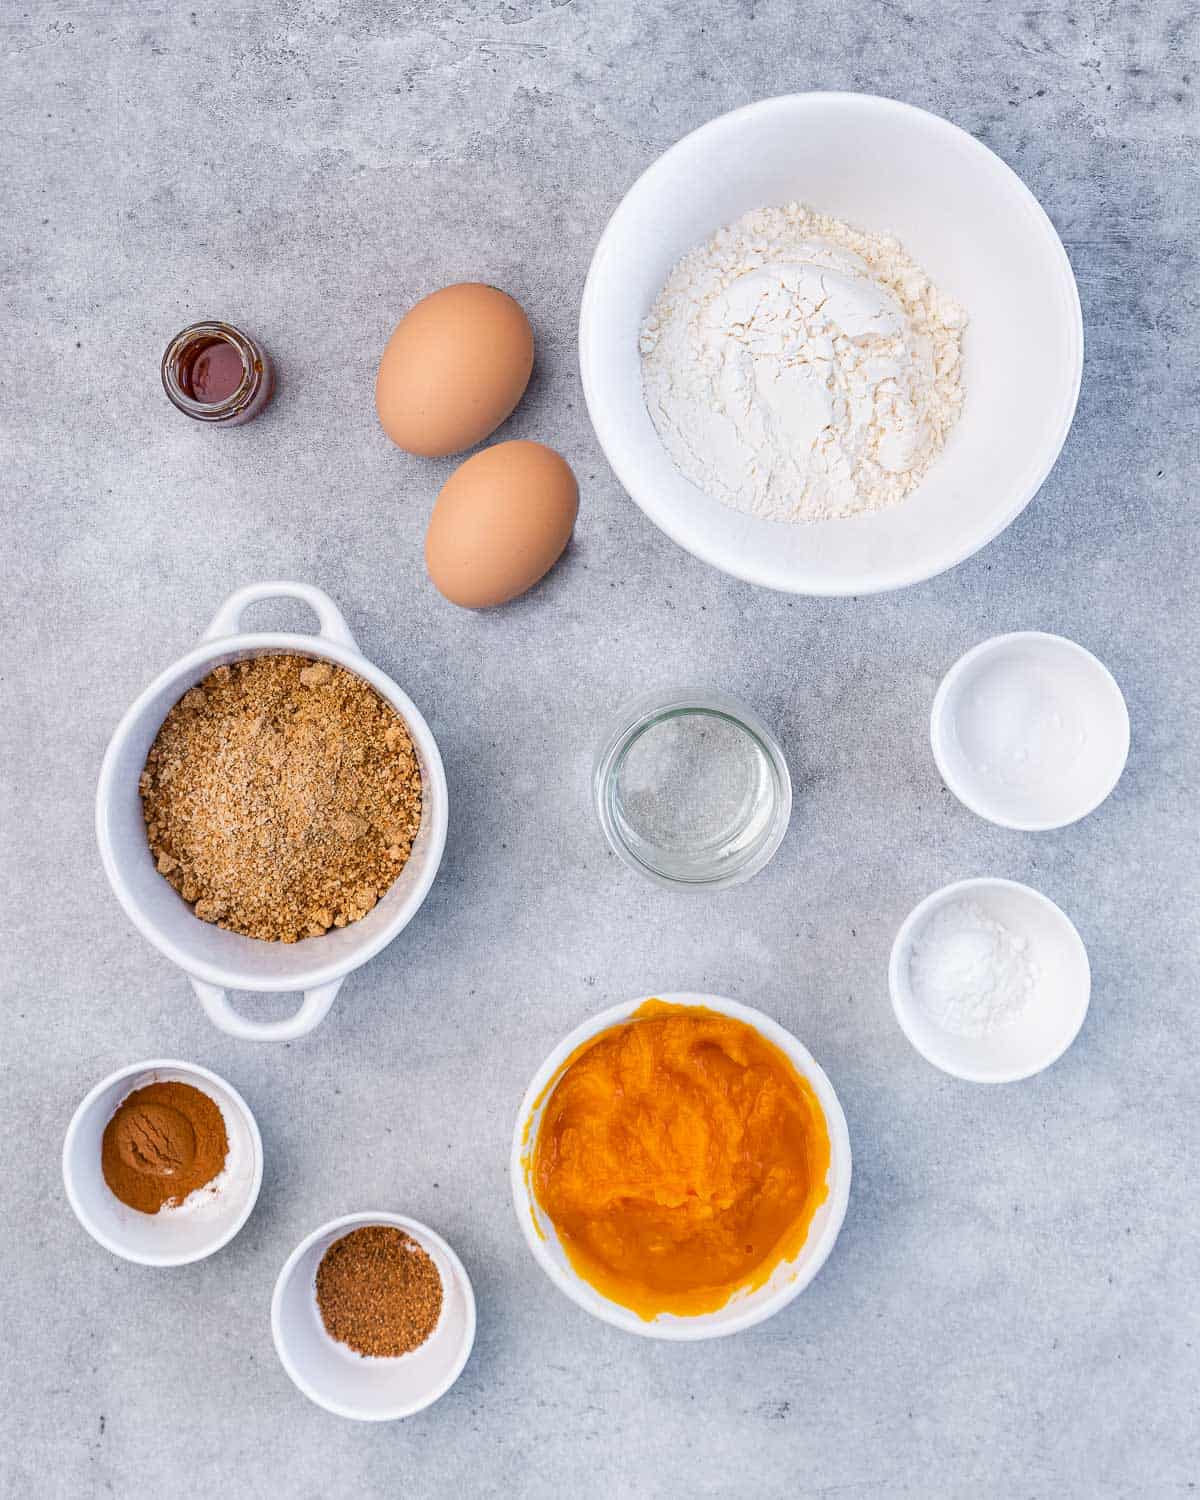 Pumpkin puree, flour, eggs, sugar, oil and spices divided into small bowls.